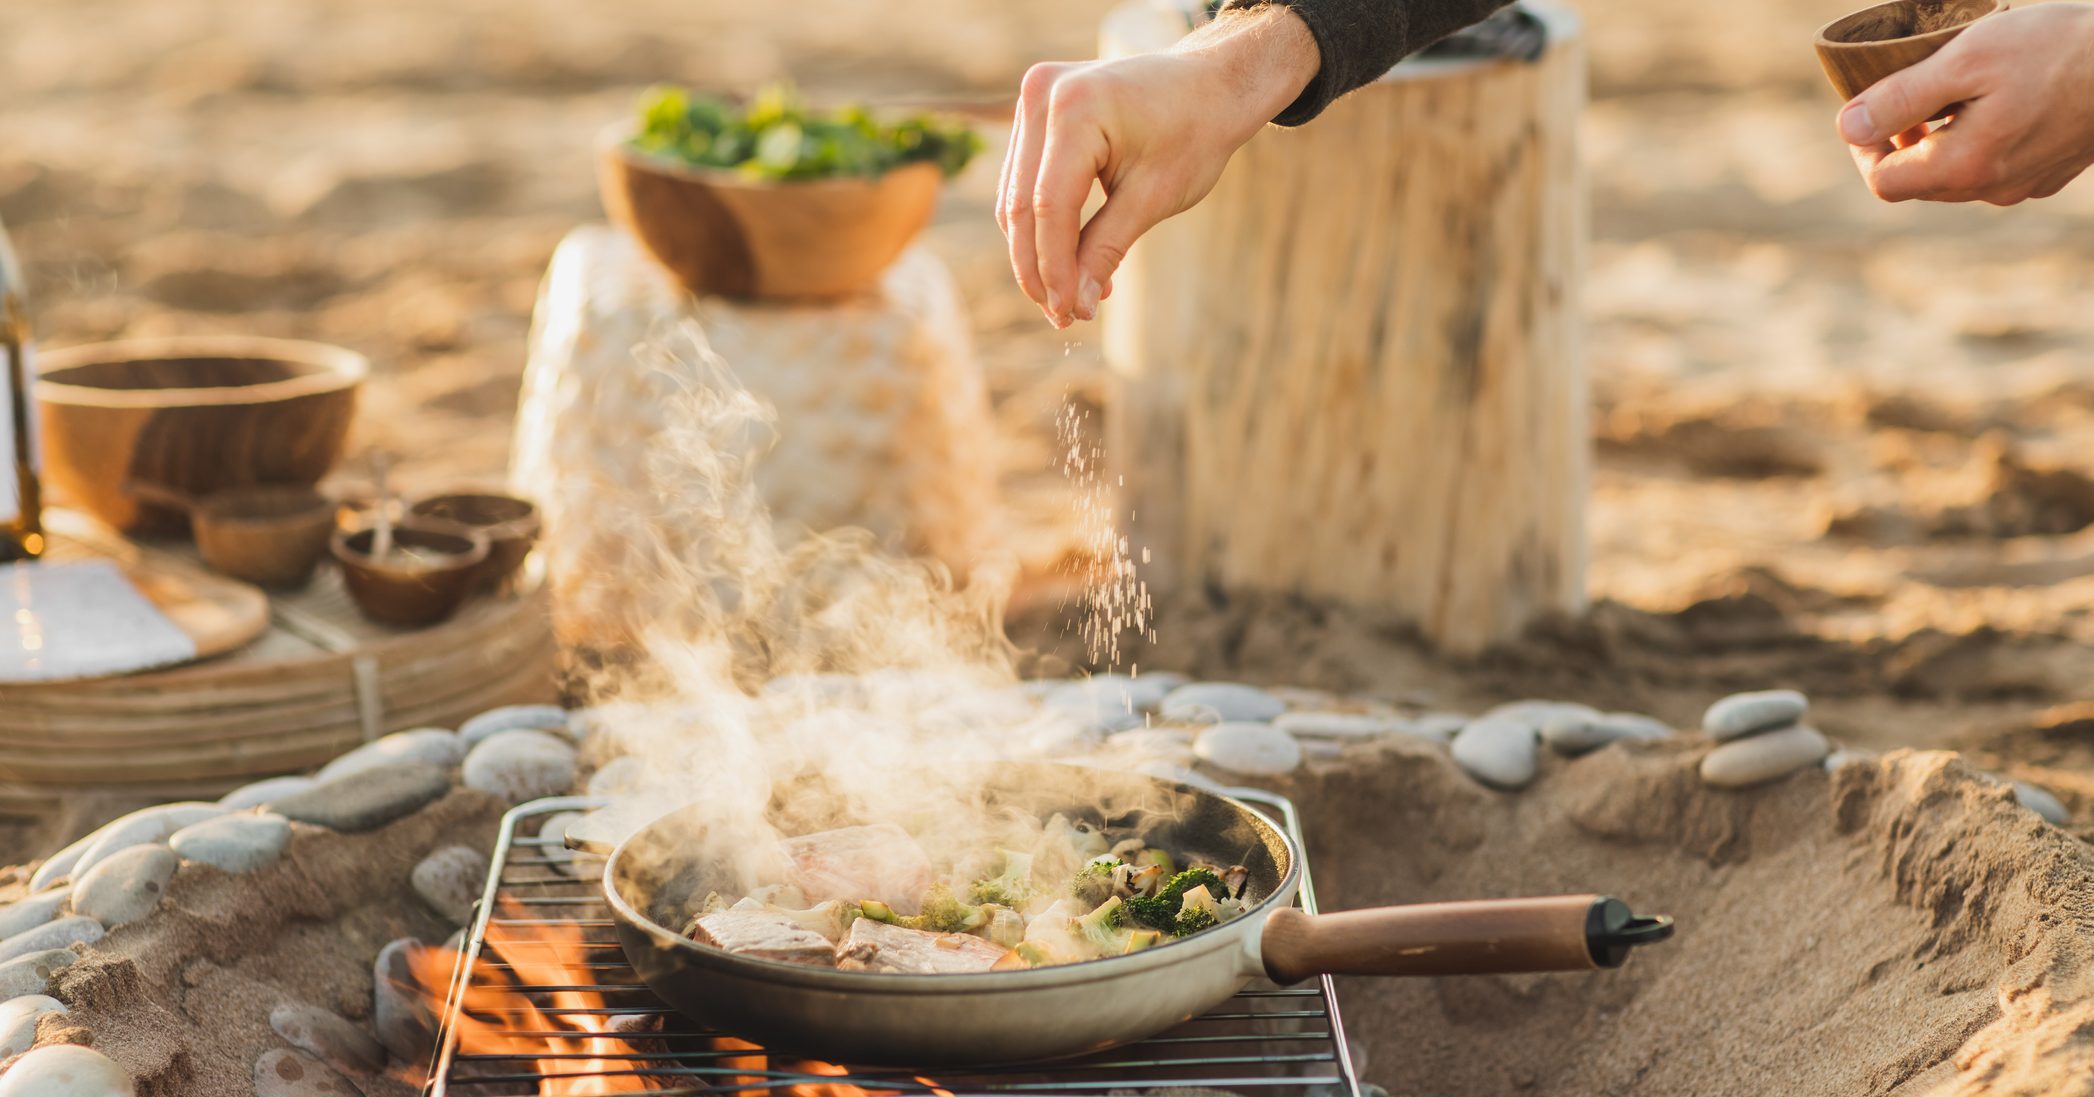 How to Cook Food Over a Campfire: 8 Helpful Tips